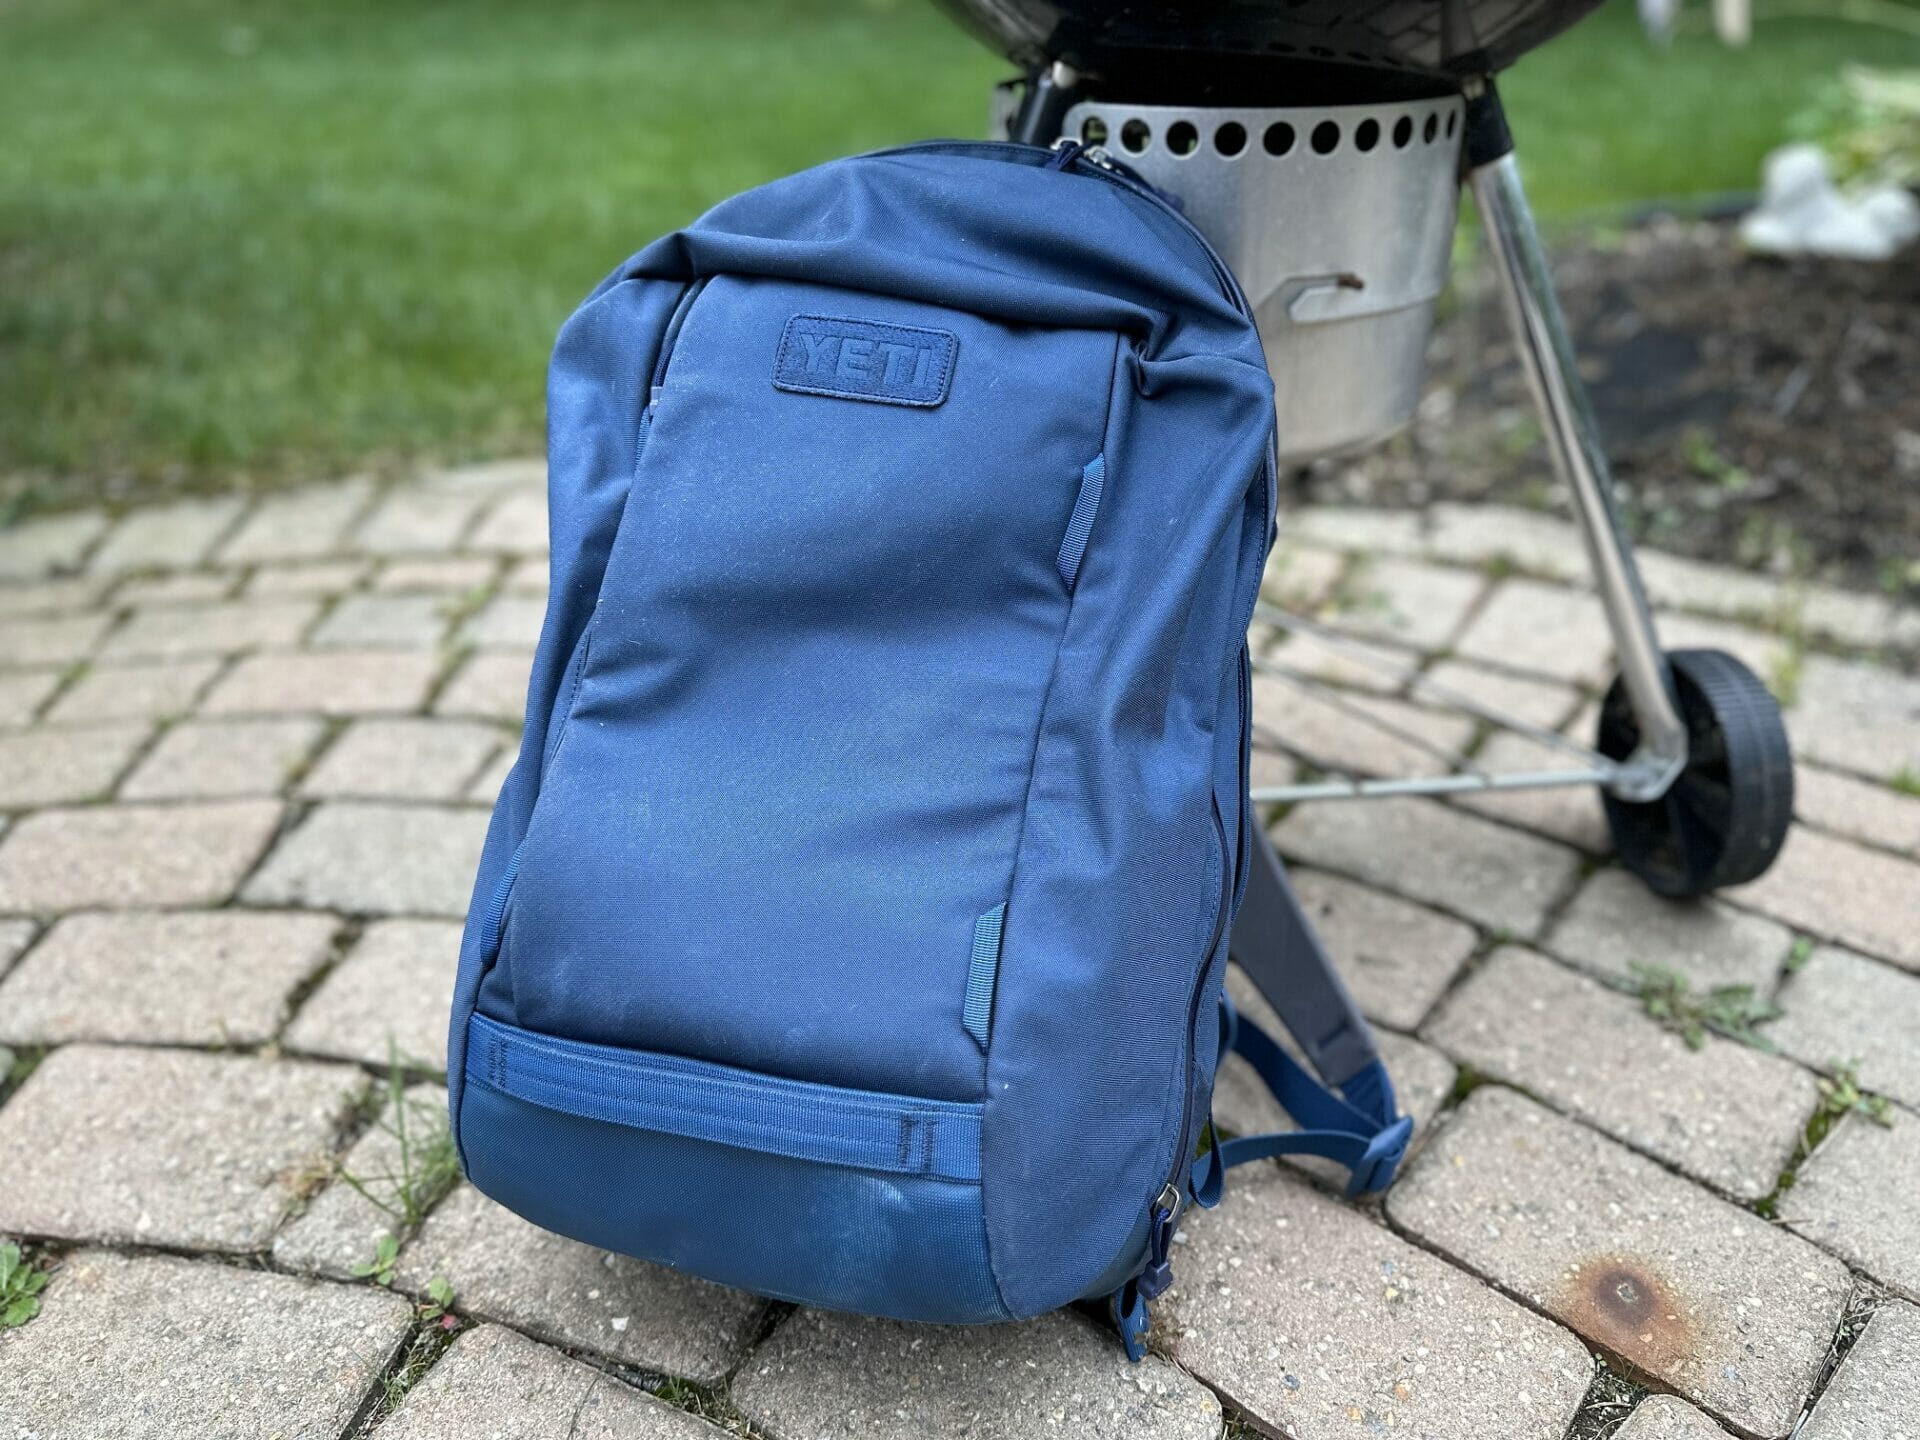 https://www.cookoutnews.com/wp-content/uploads/2023/08/Yeti-Crossroads-Backpack-in-Front-of-a-Weber-Kettle-Grill.jpg